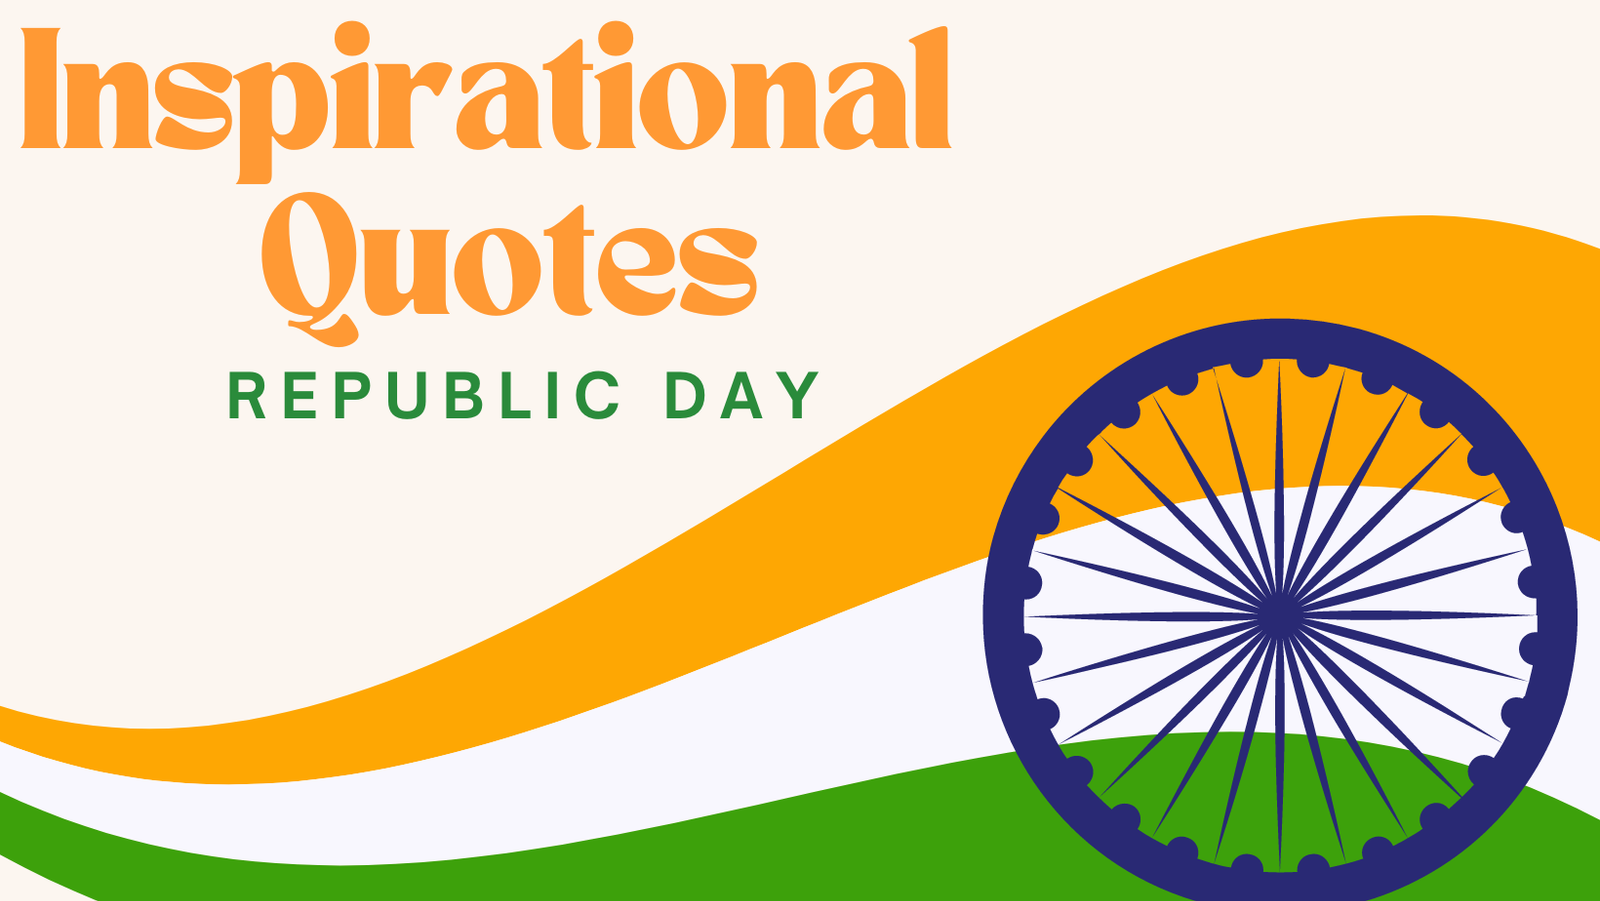 Celebrating the Spirit of Freedom: 10 Inspirational Republic Day Quotes